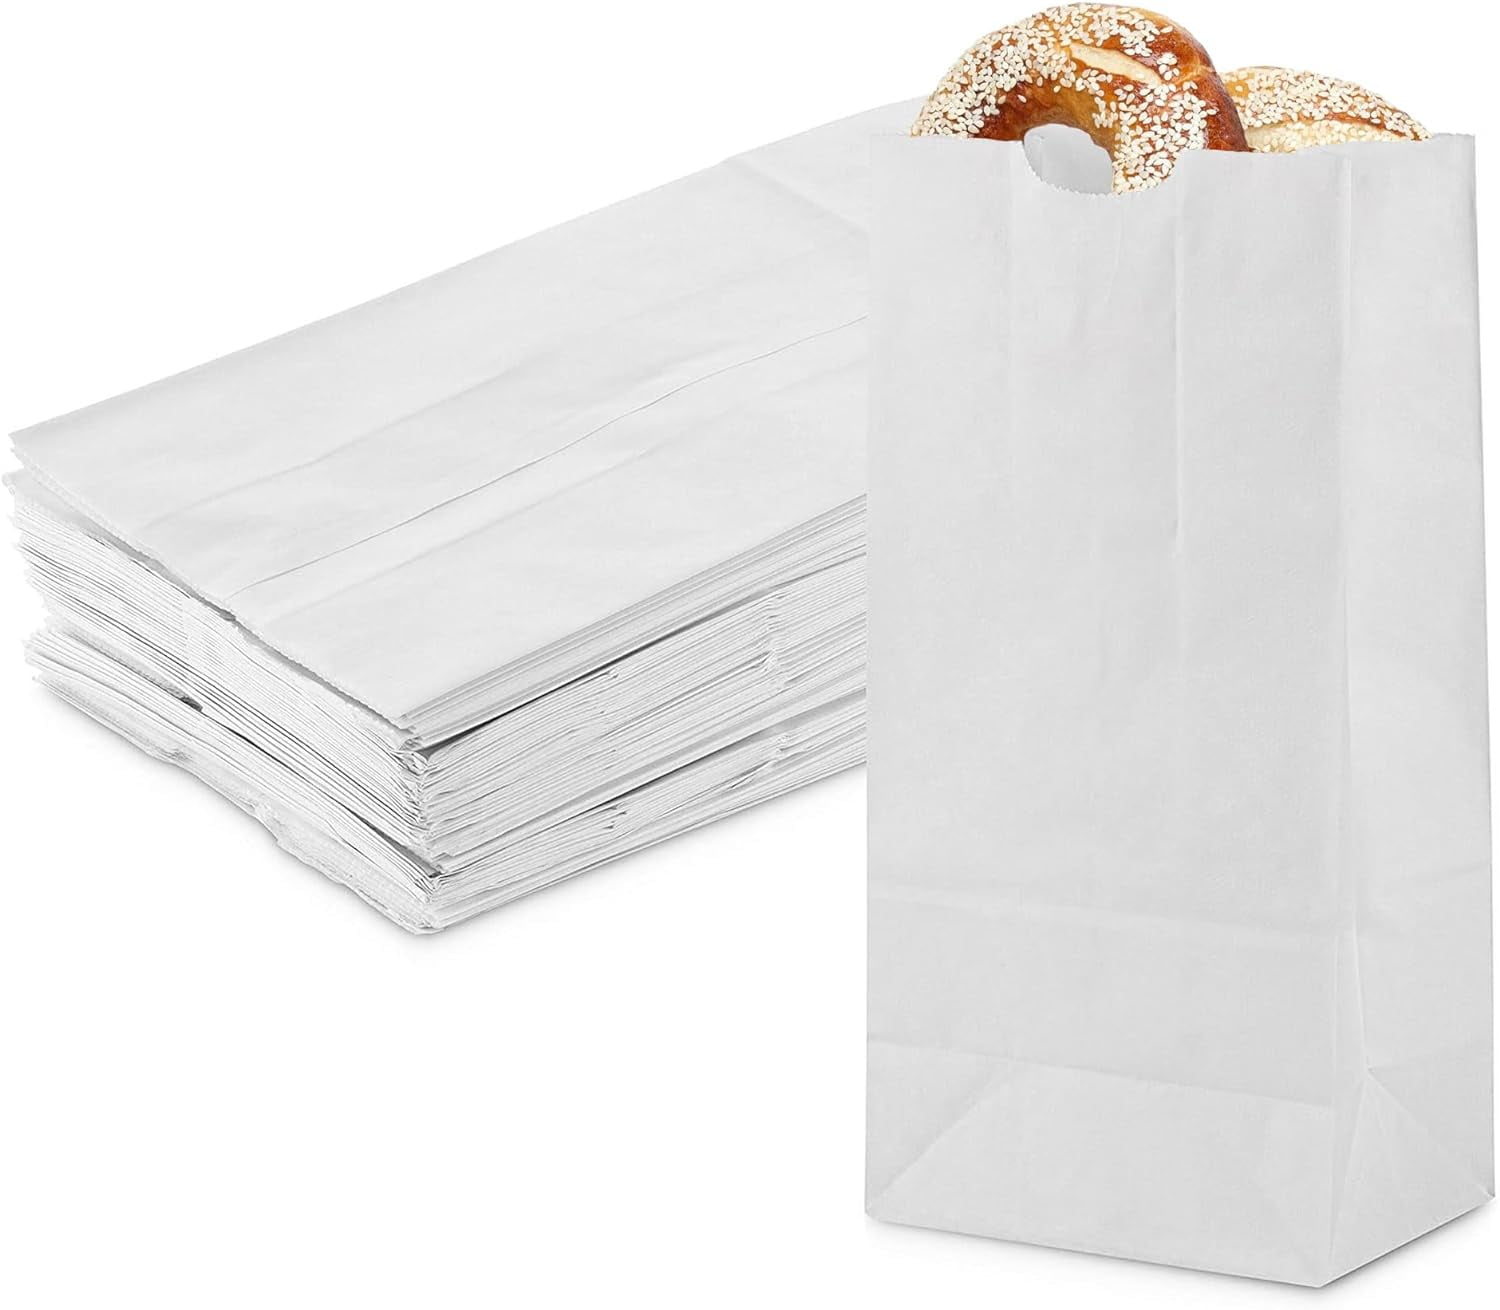 Stock Your Home 4 lb White Paper Bags (250 Count) - Eco Friendly White Lunch Bags - Small White Paper Bags for Packing Lunch - Blank White Lunch